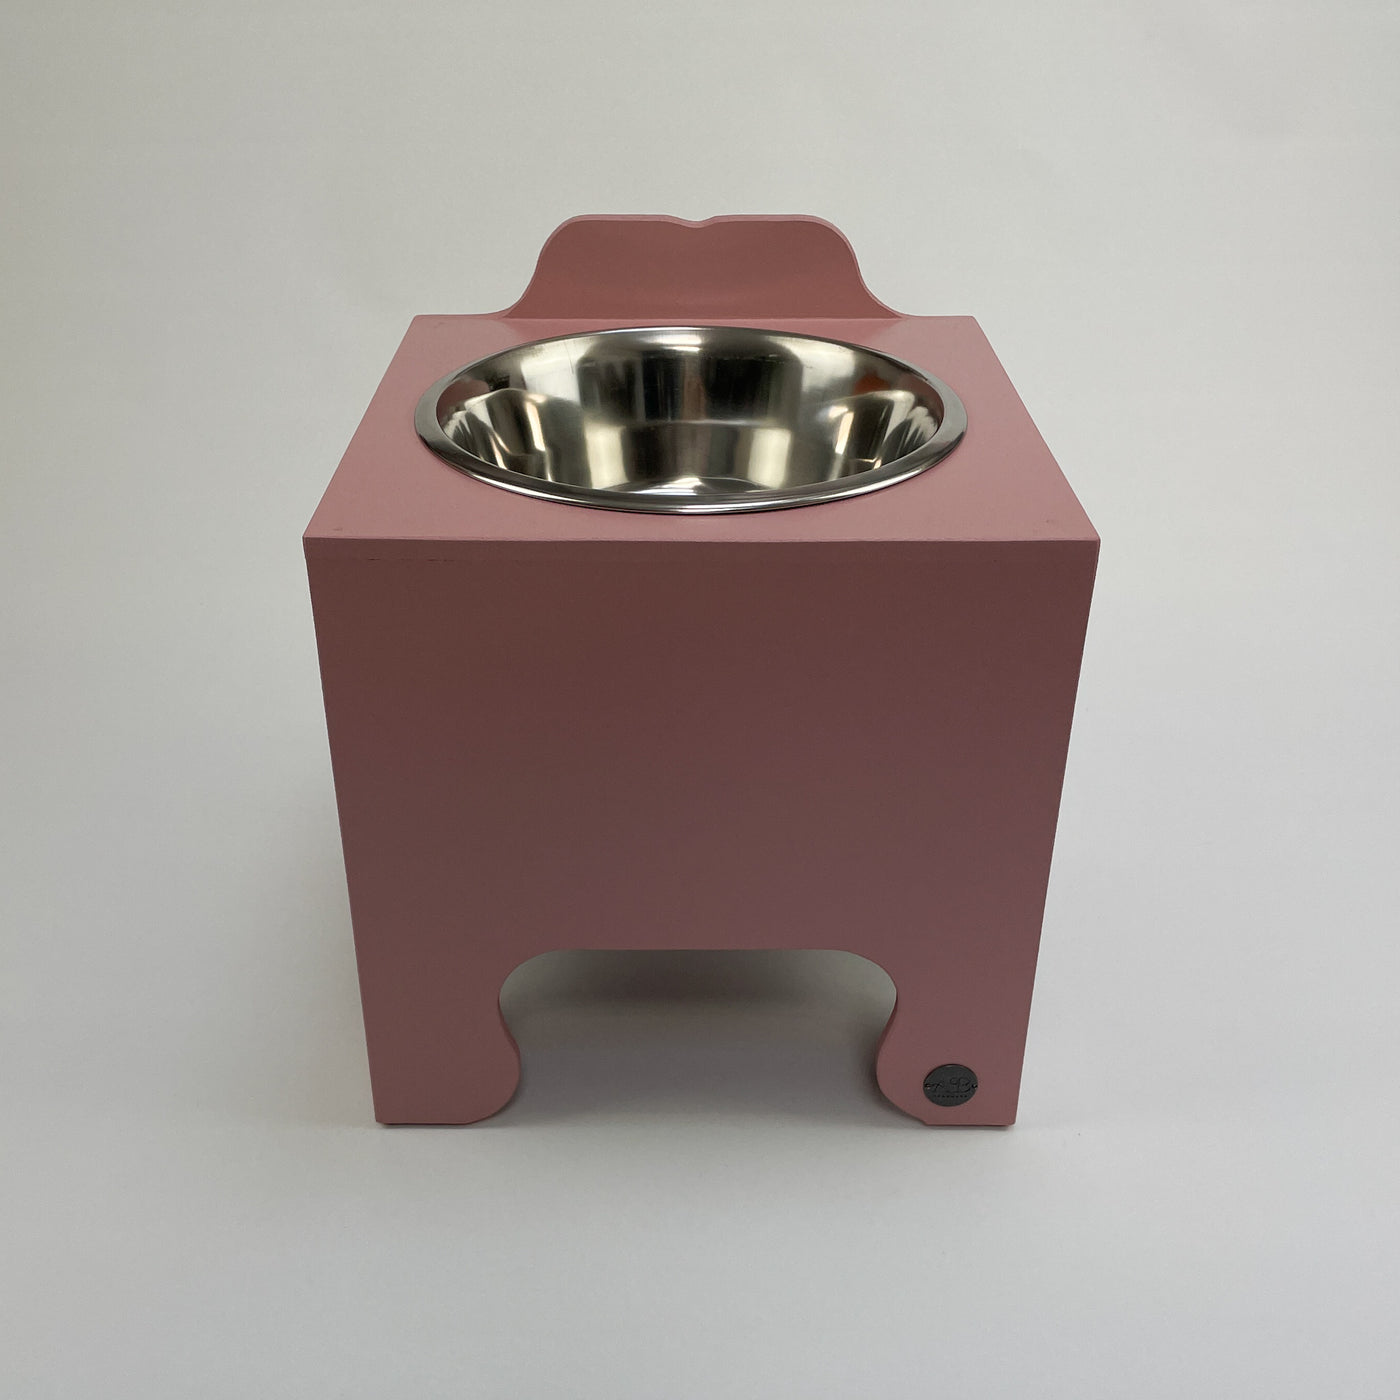 Blush pink, extra large raised single bowl dog feeding stand with stainless steel dish.